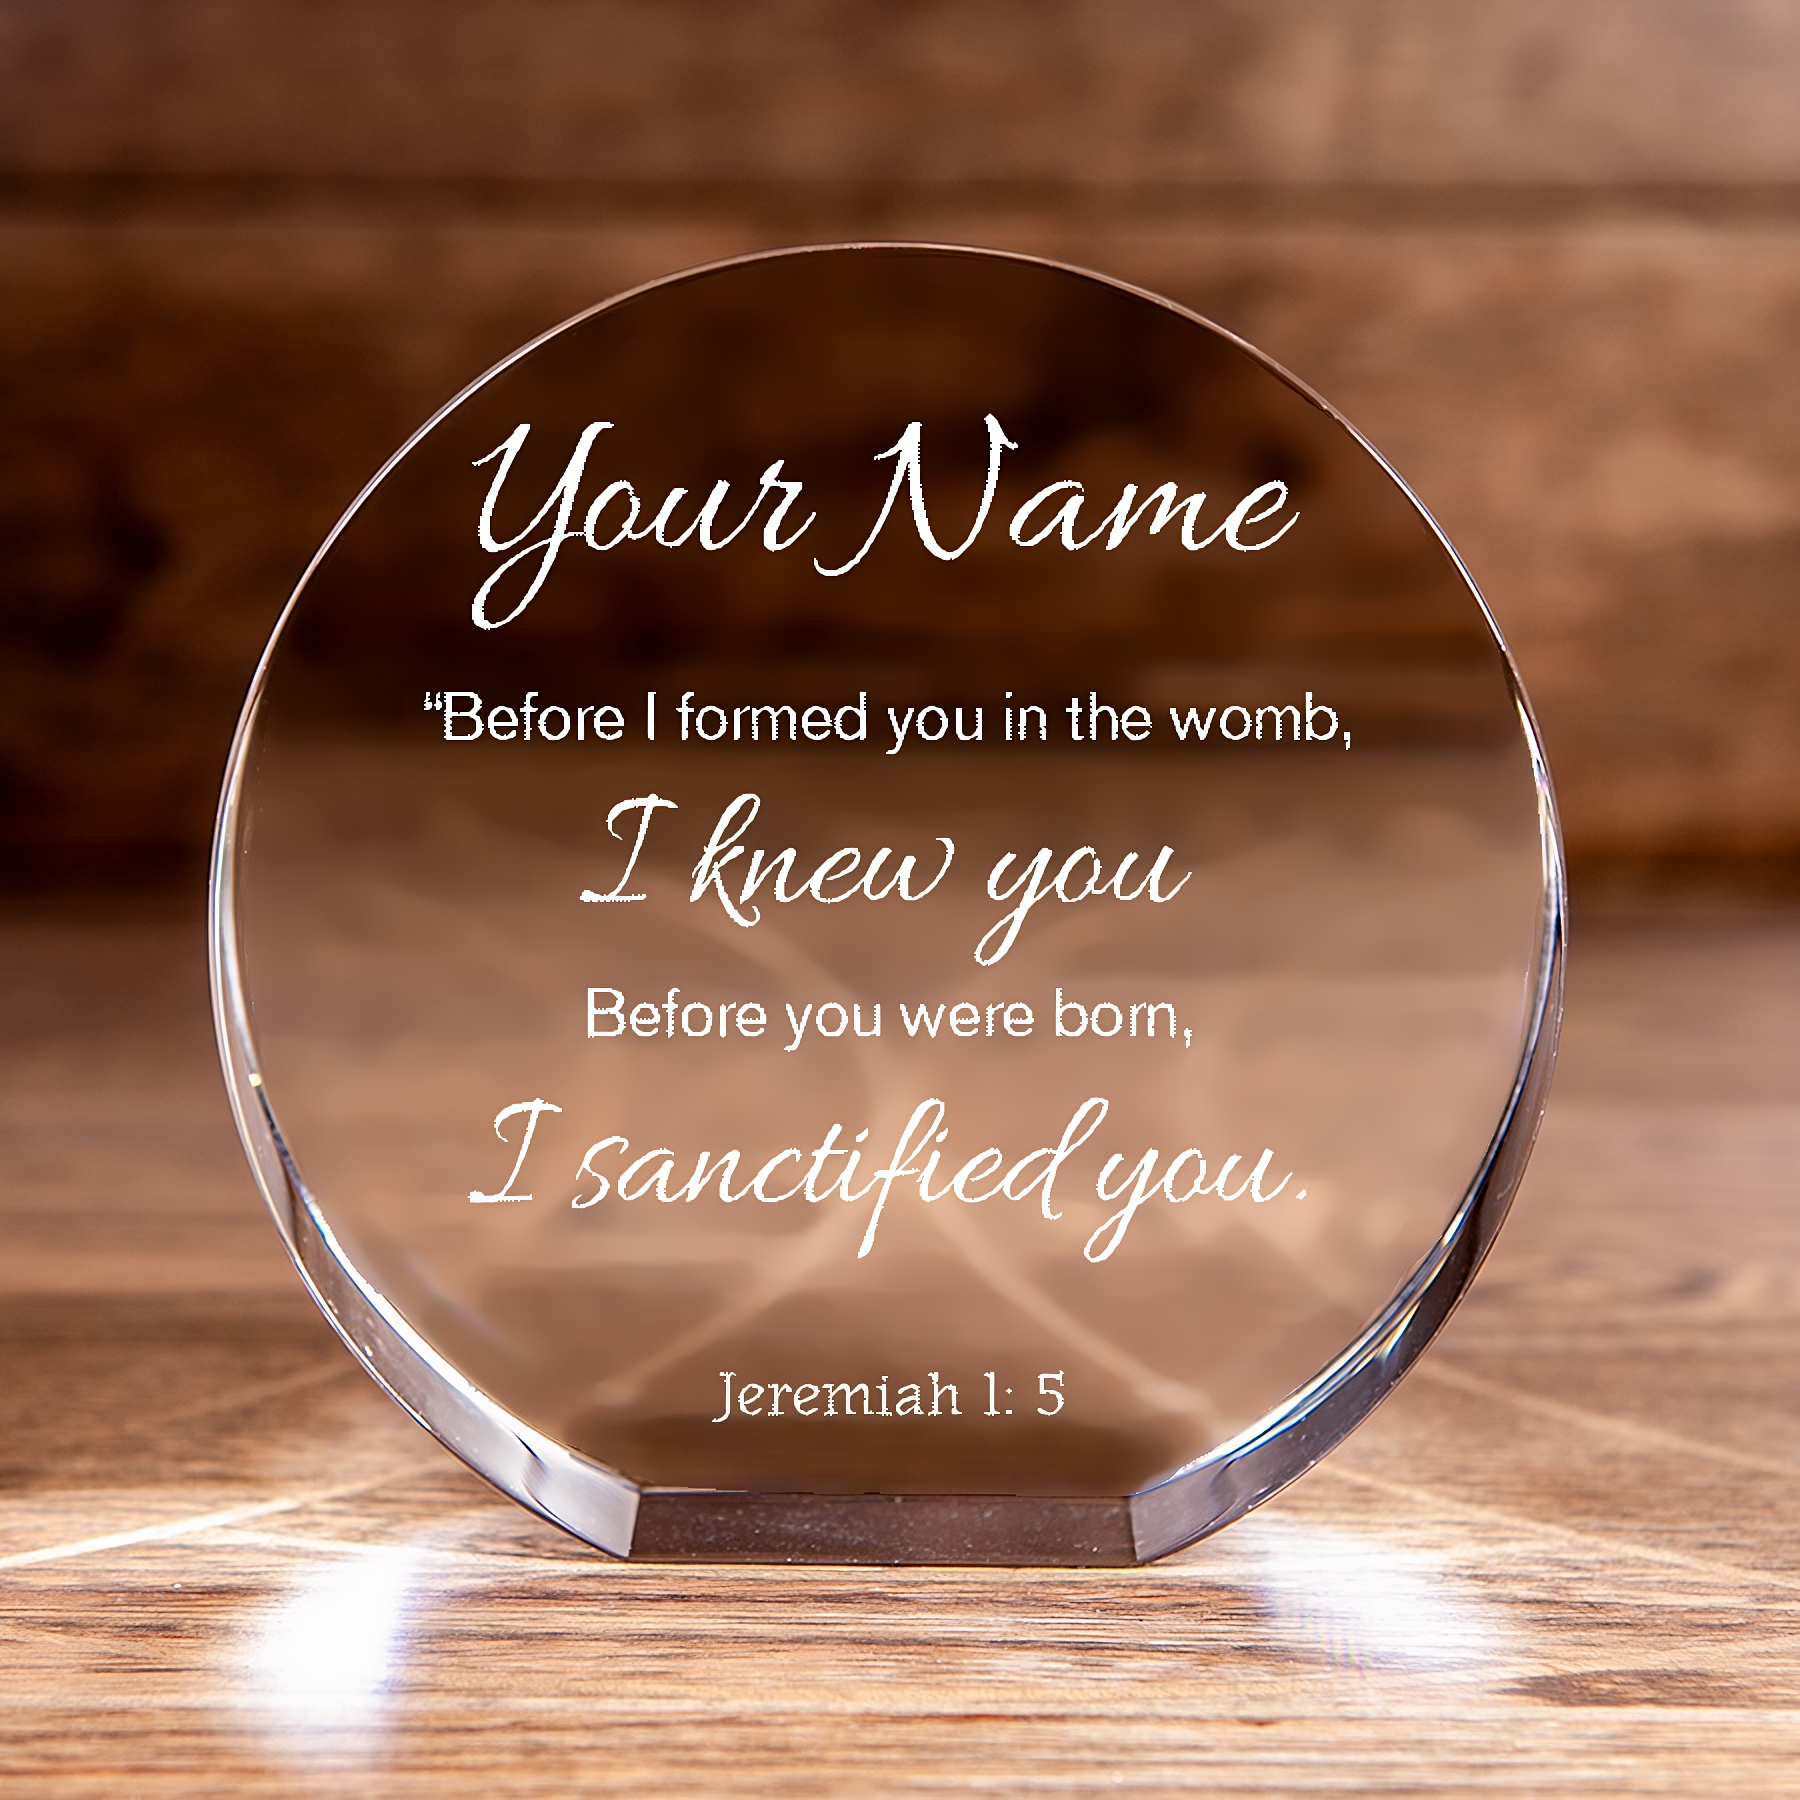 Jeremiah 1:5 I Sanctified You Circle Cut Crystal Personalized Christian Gift-Express Your Love Gifts